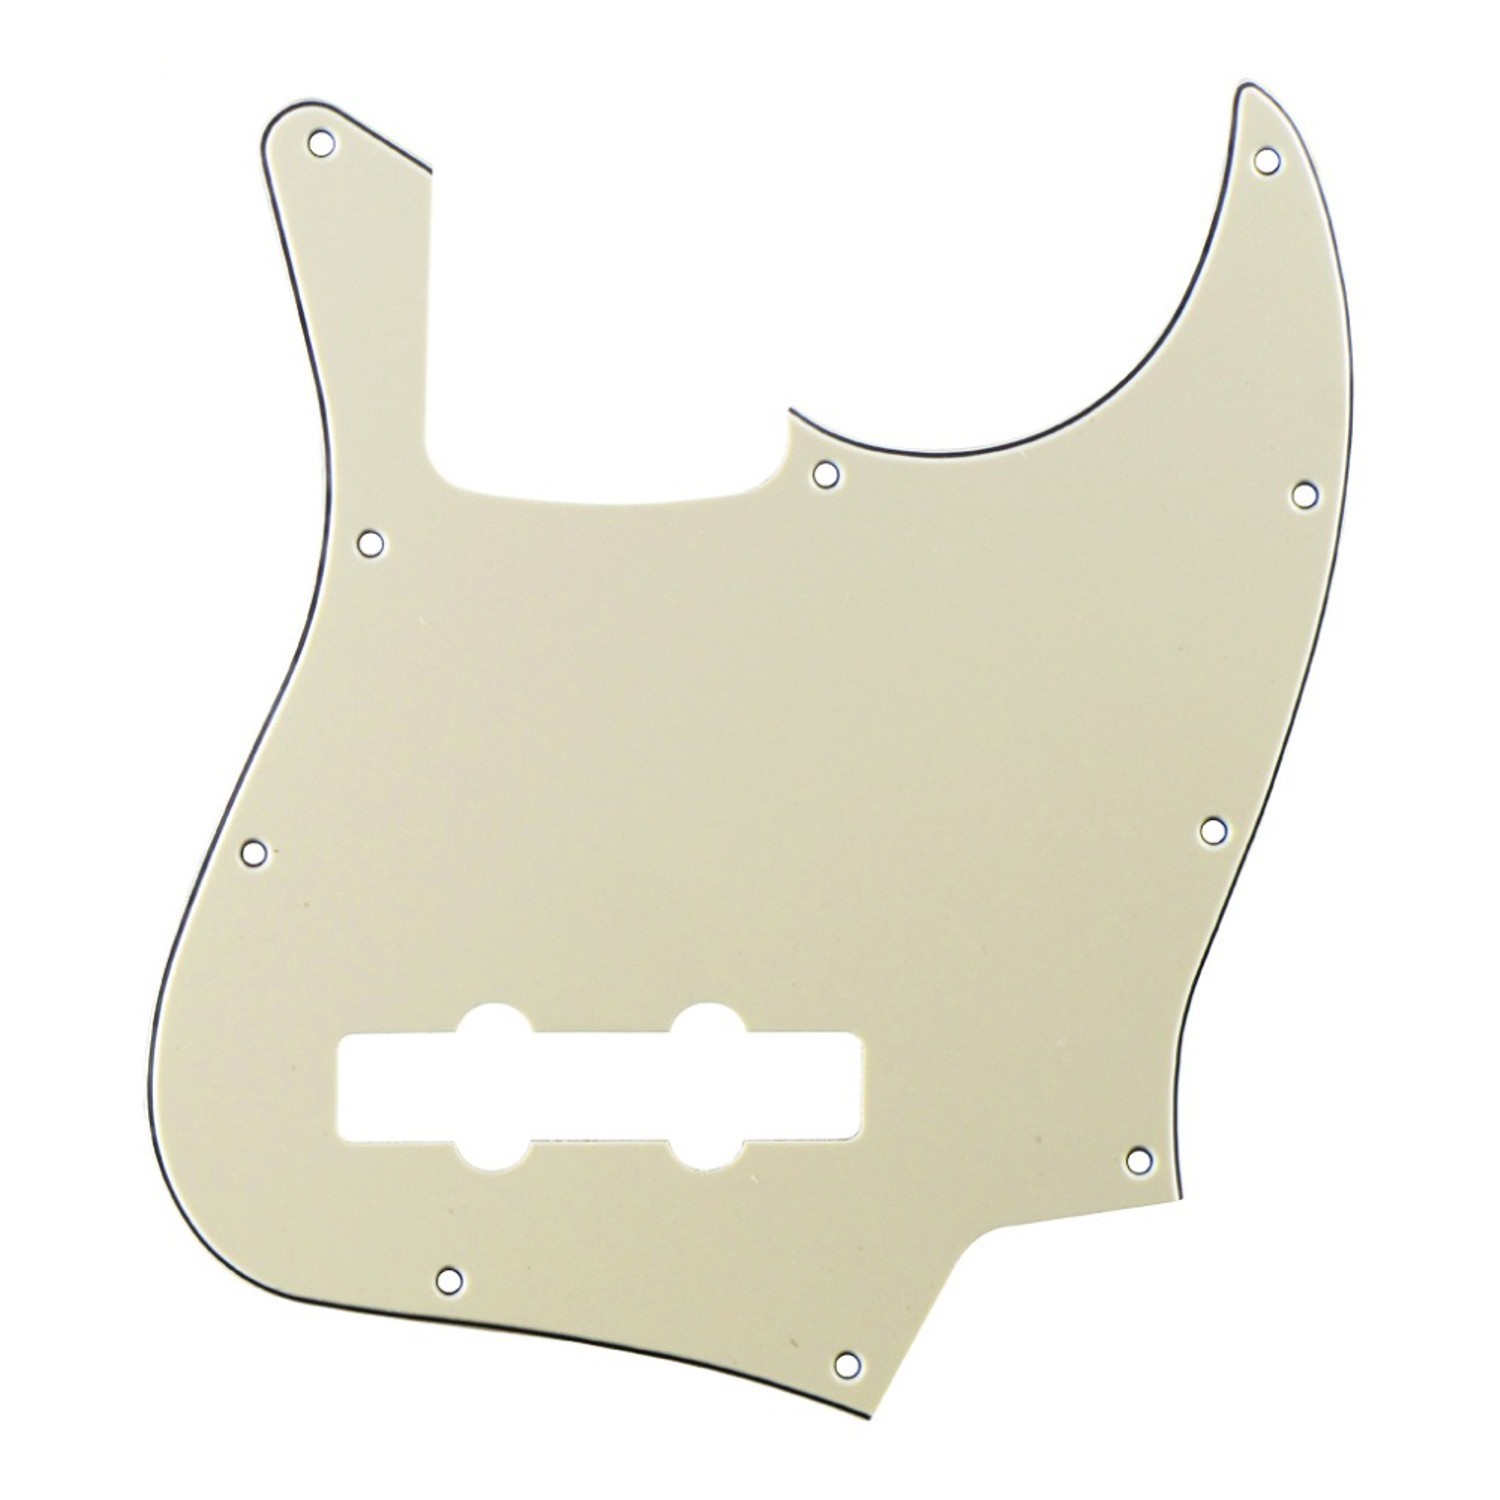 1Ply Sparkle Silver Color FLEOR 10 Hole Jazz Bass Pickguard Scratch Plate w/Screws for 4 Strings American/Mexican Standard Jazz Bass Part 